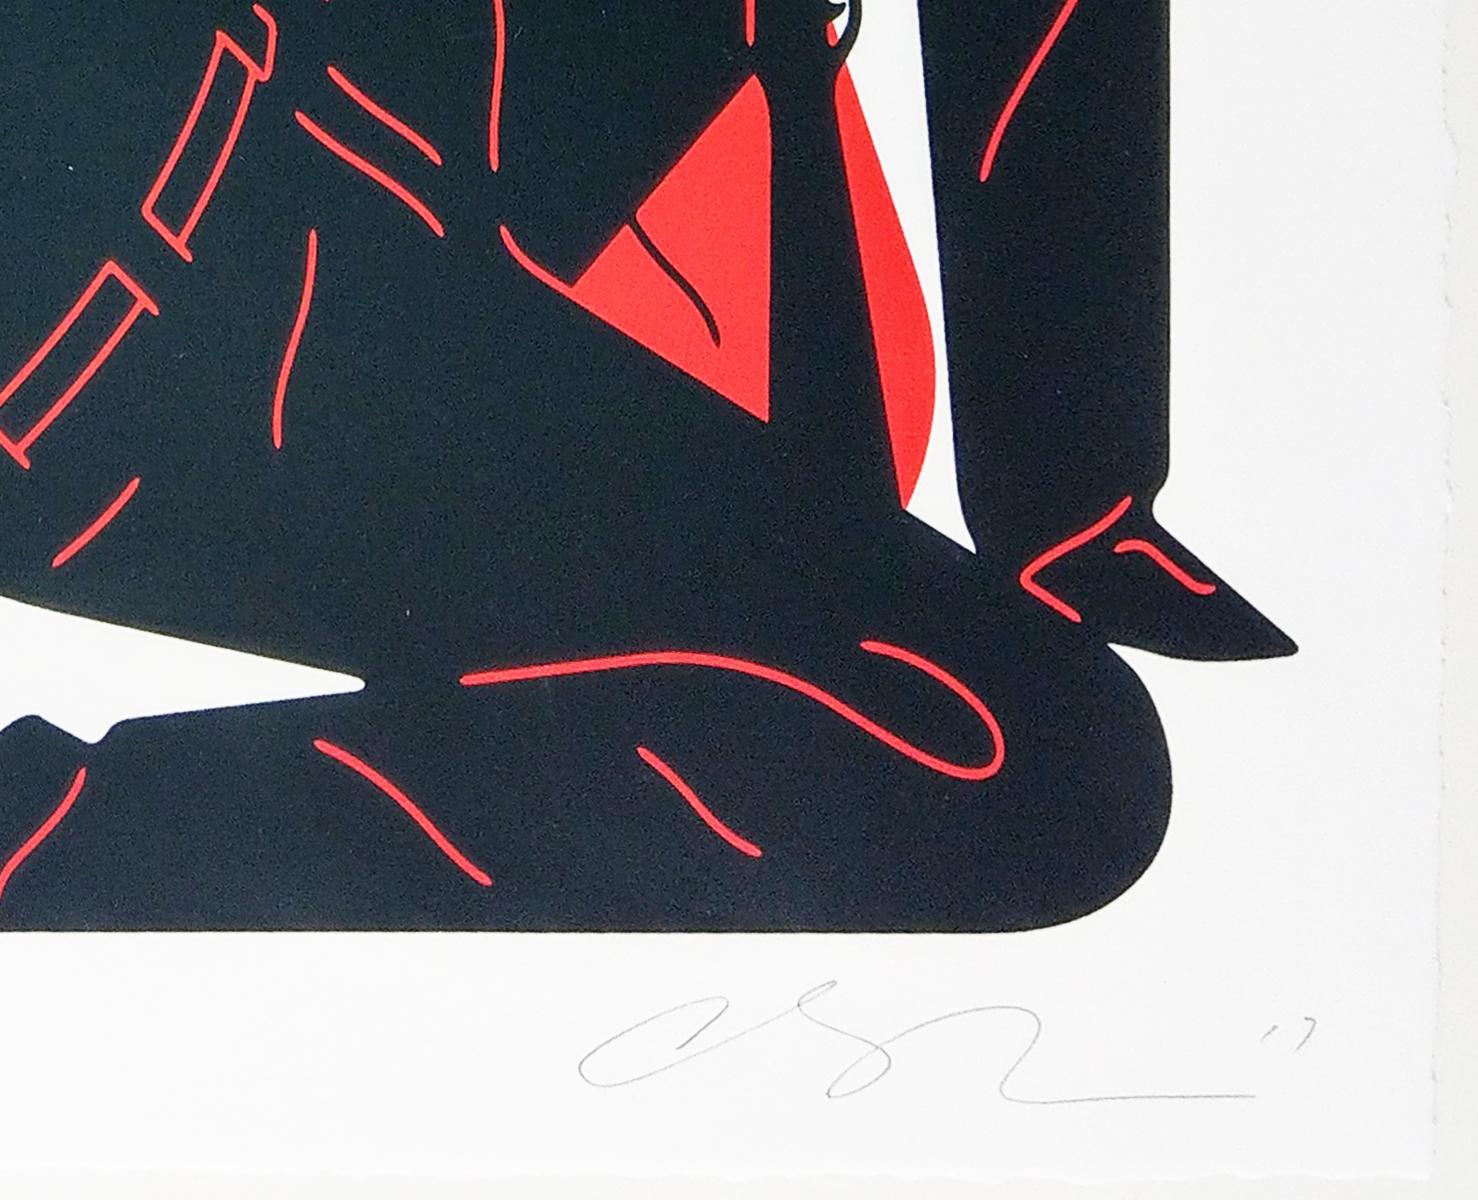 cleon peterson art for sale